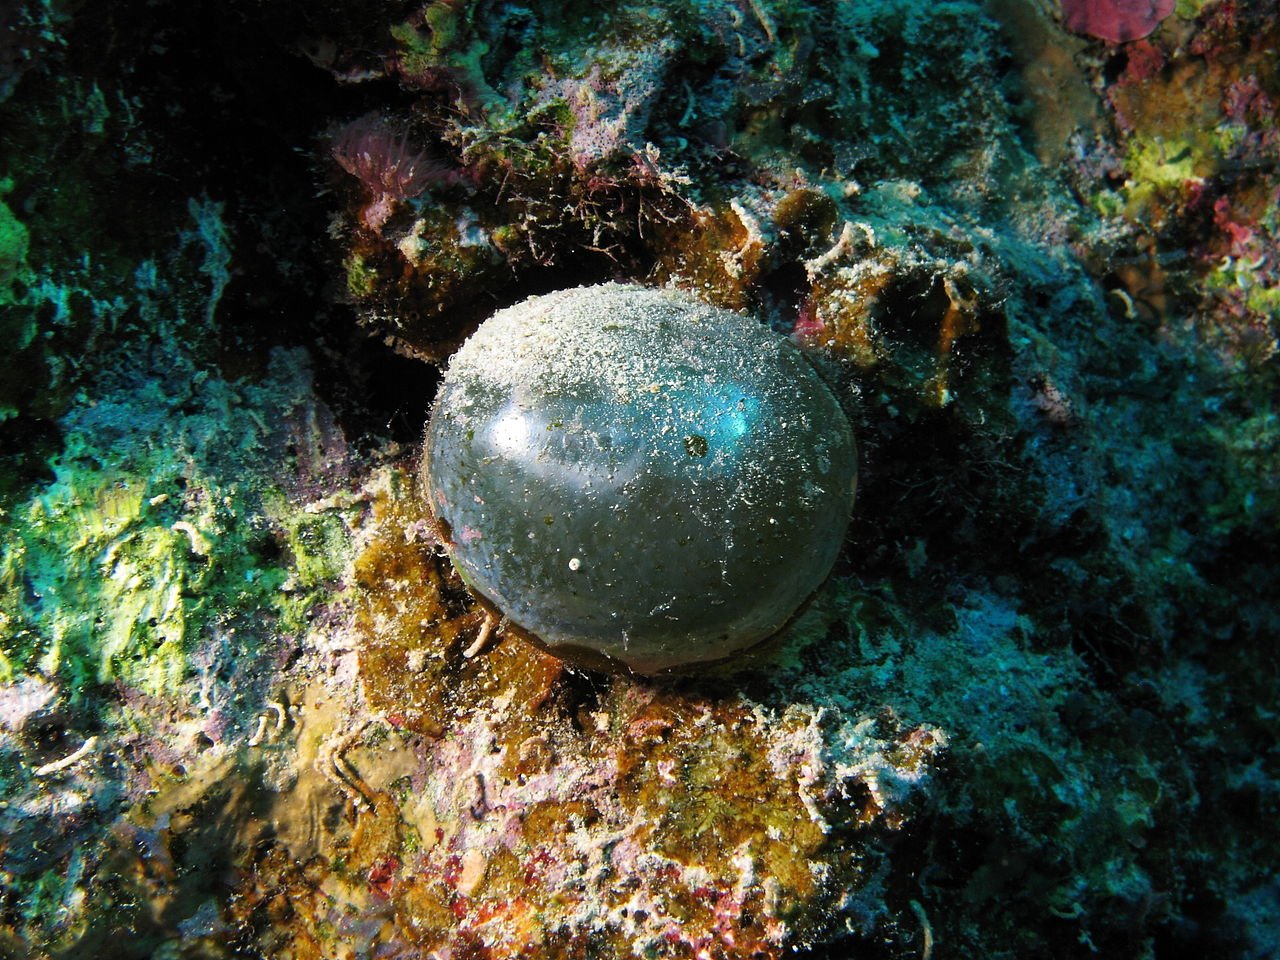 Valonia Ventricosa-One Of The Largest Single-Celled Living Organism On Earth